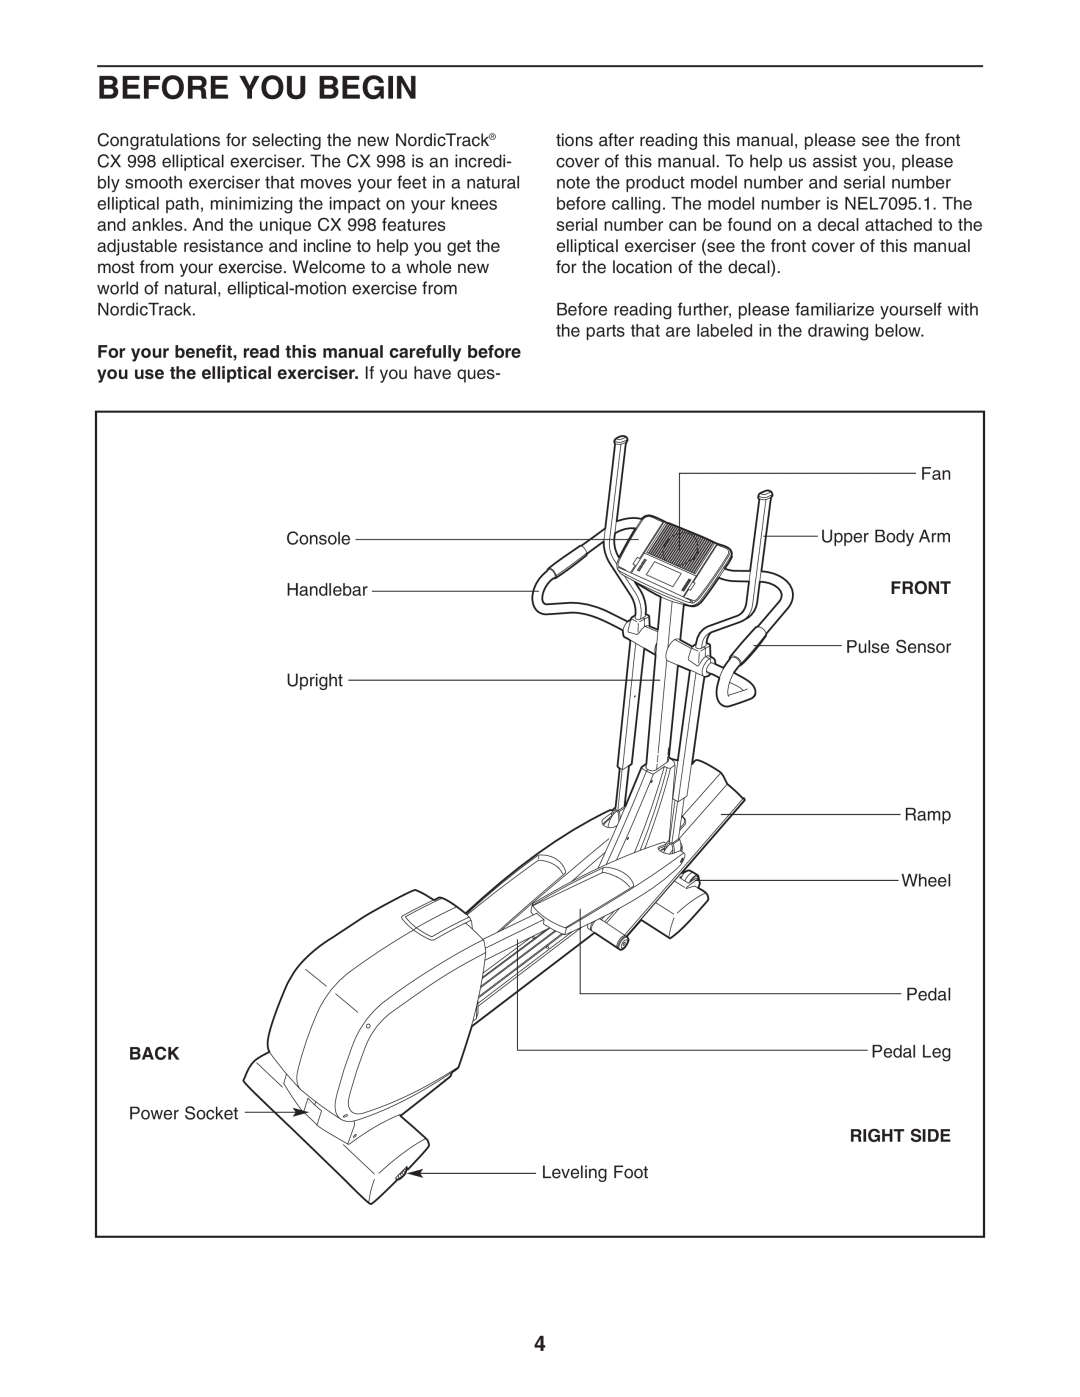 NordicTrack NEL7095.1 user manual Before You Begin, Front, Back, Right Side 